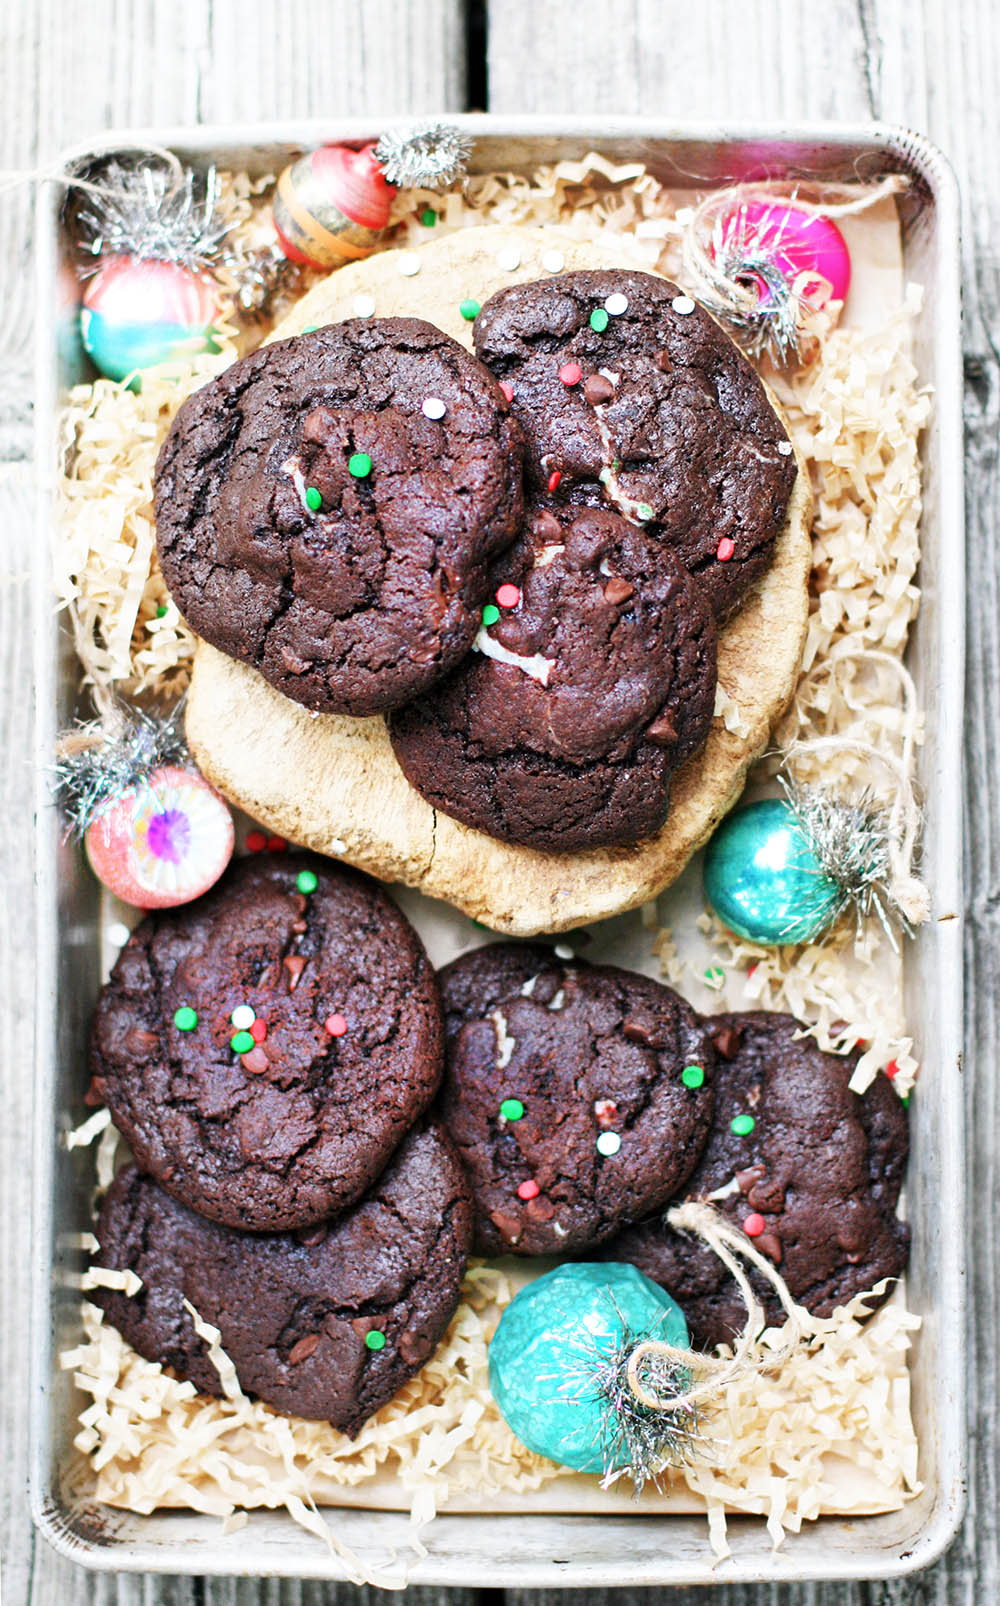 Cream cheese-stuffed chocolate mint cookies: A festive holiday cookie recipe!